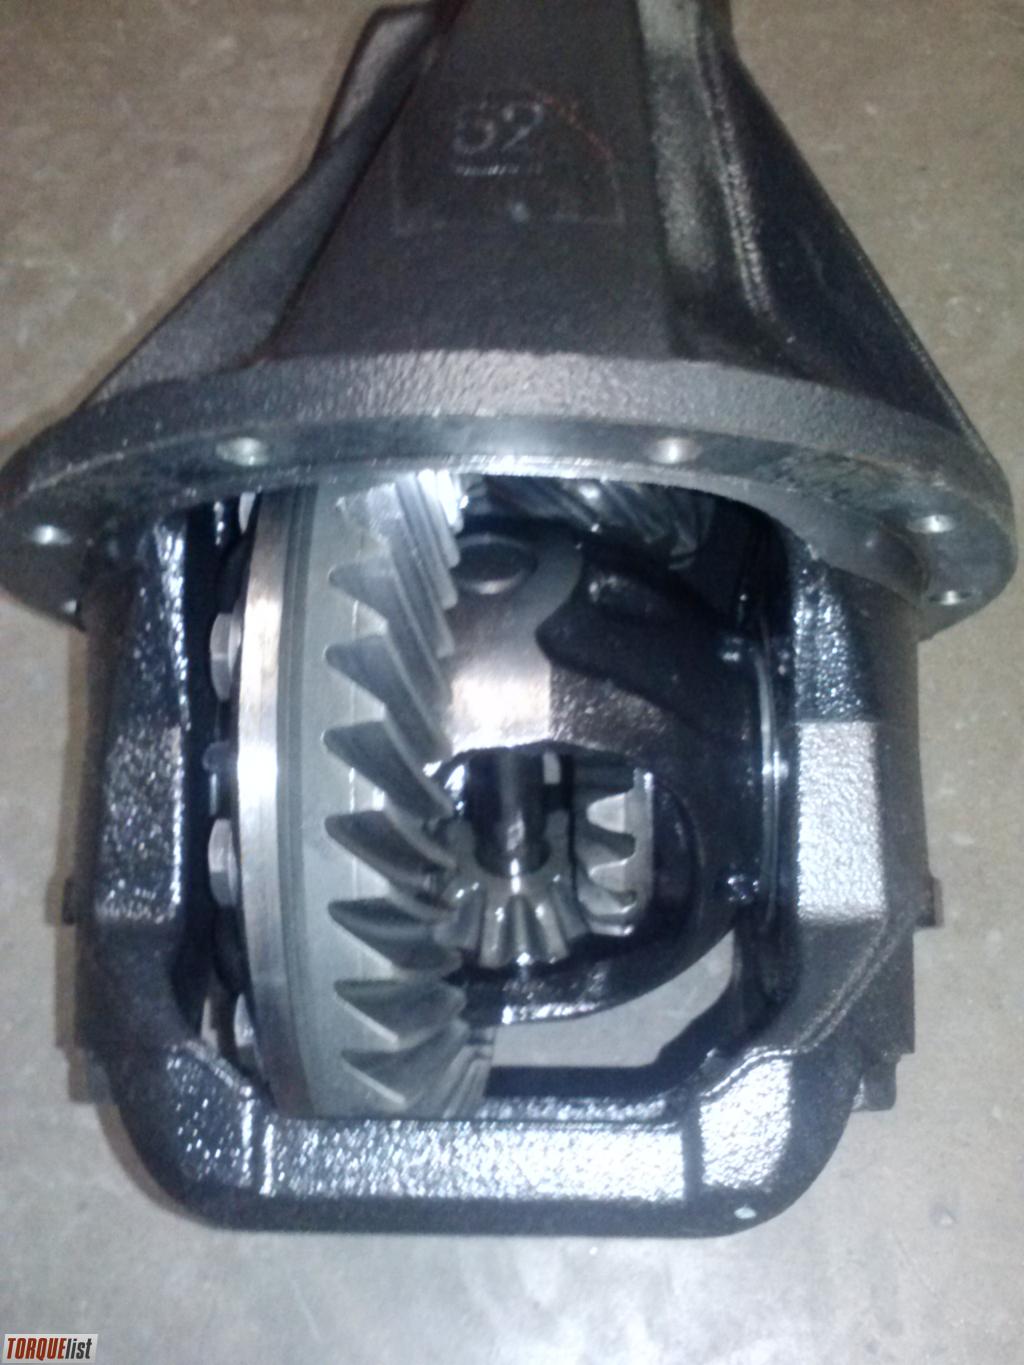 TORQUELIST - For Sale: Toyota Tacoma rear differential